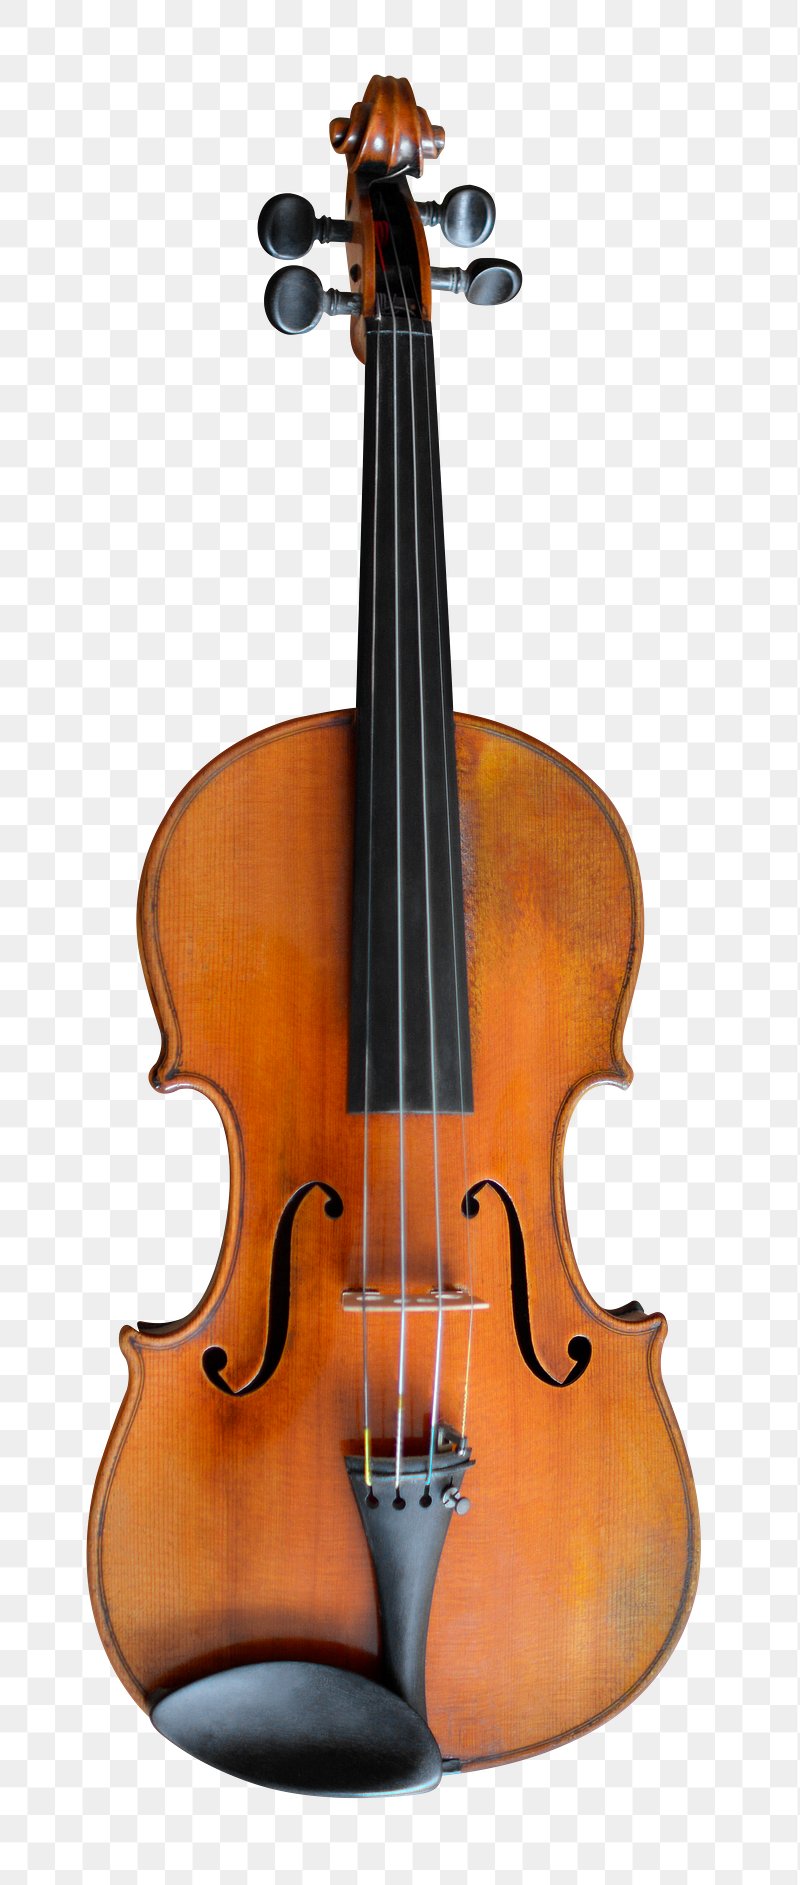 Violin Images | Free Photos, PNG Stickers, Wallpapers & Backgrounds -  rawpixel